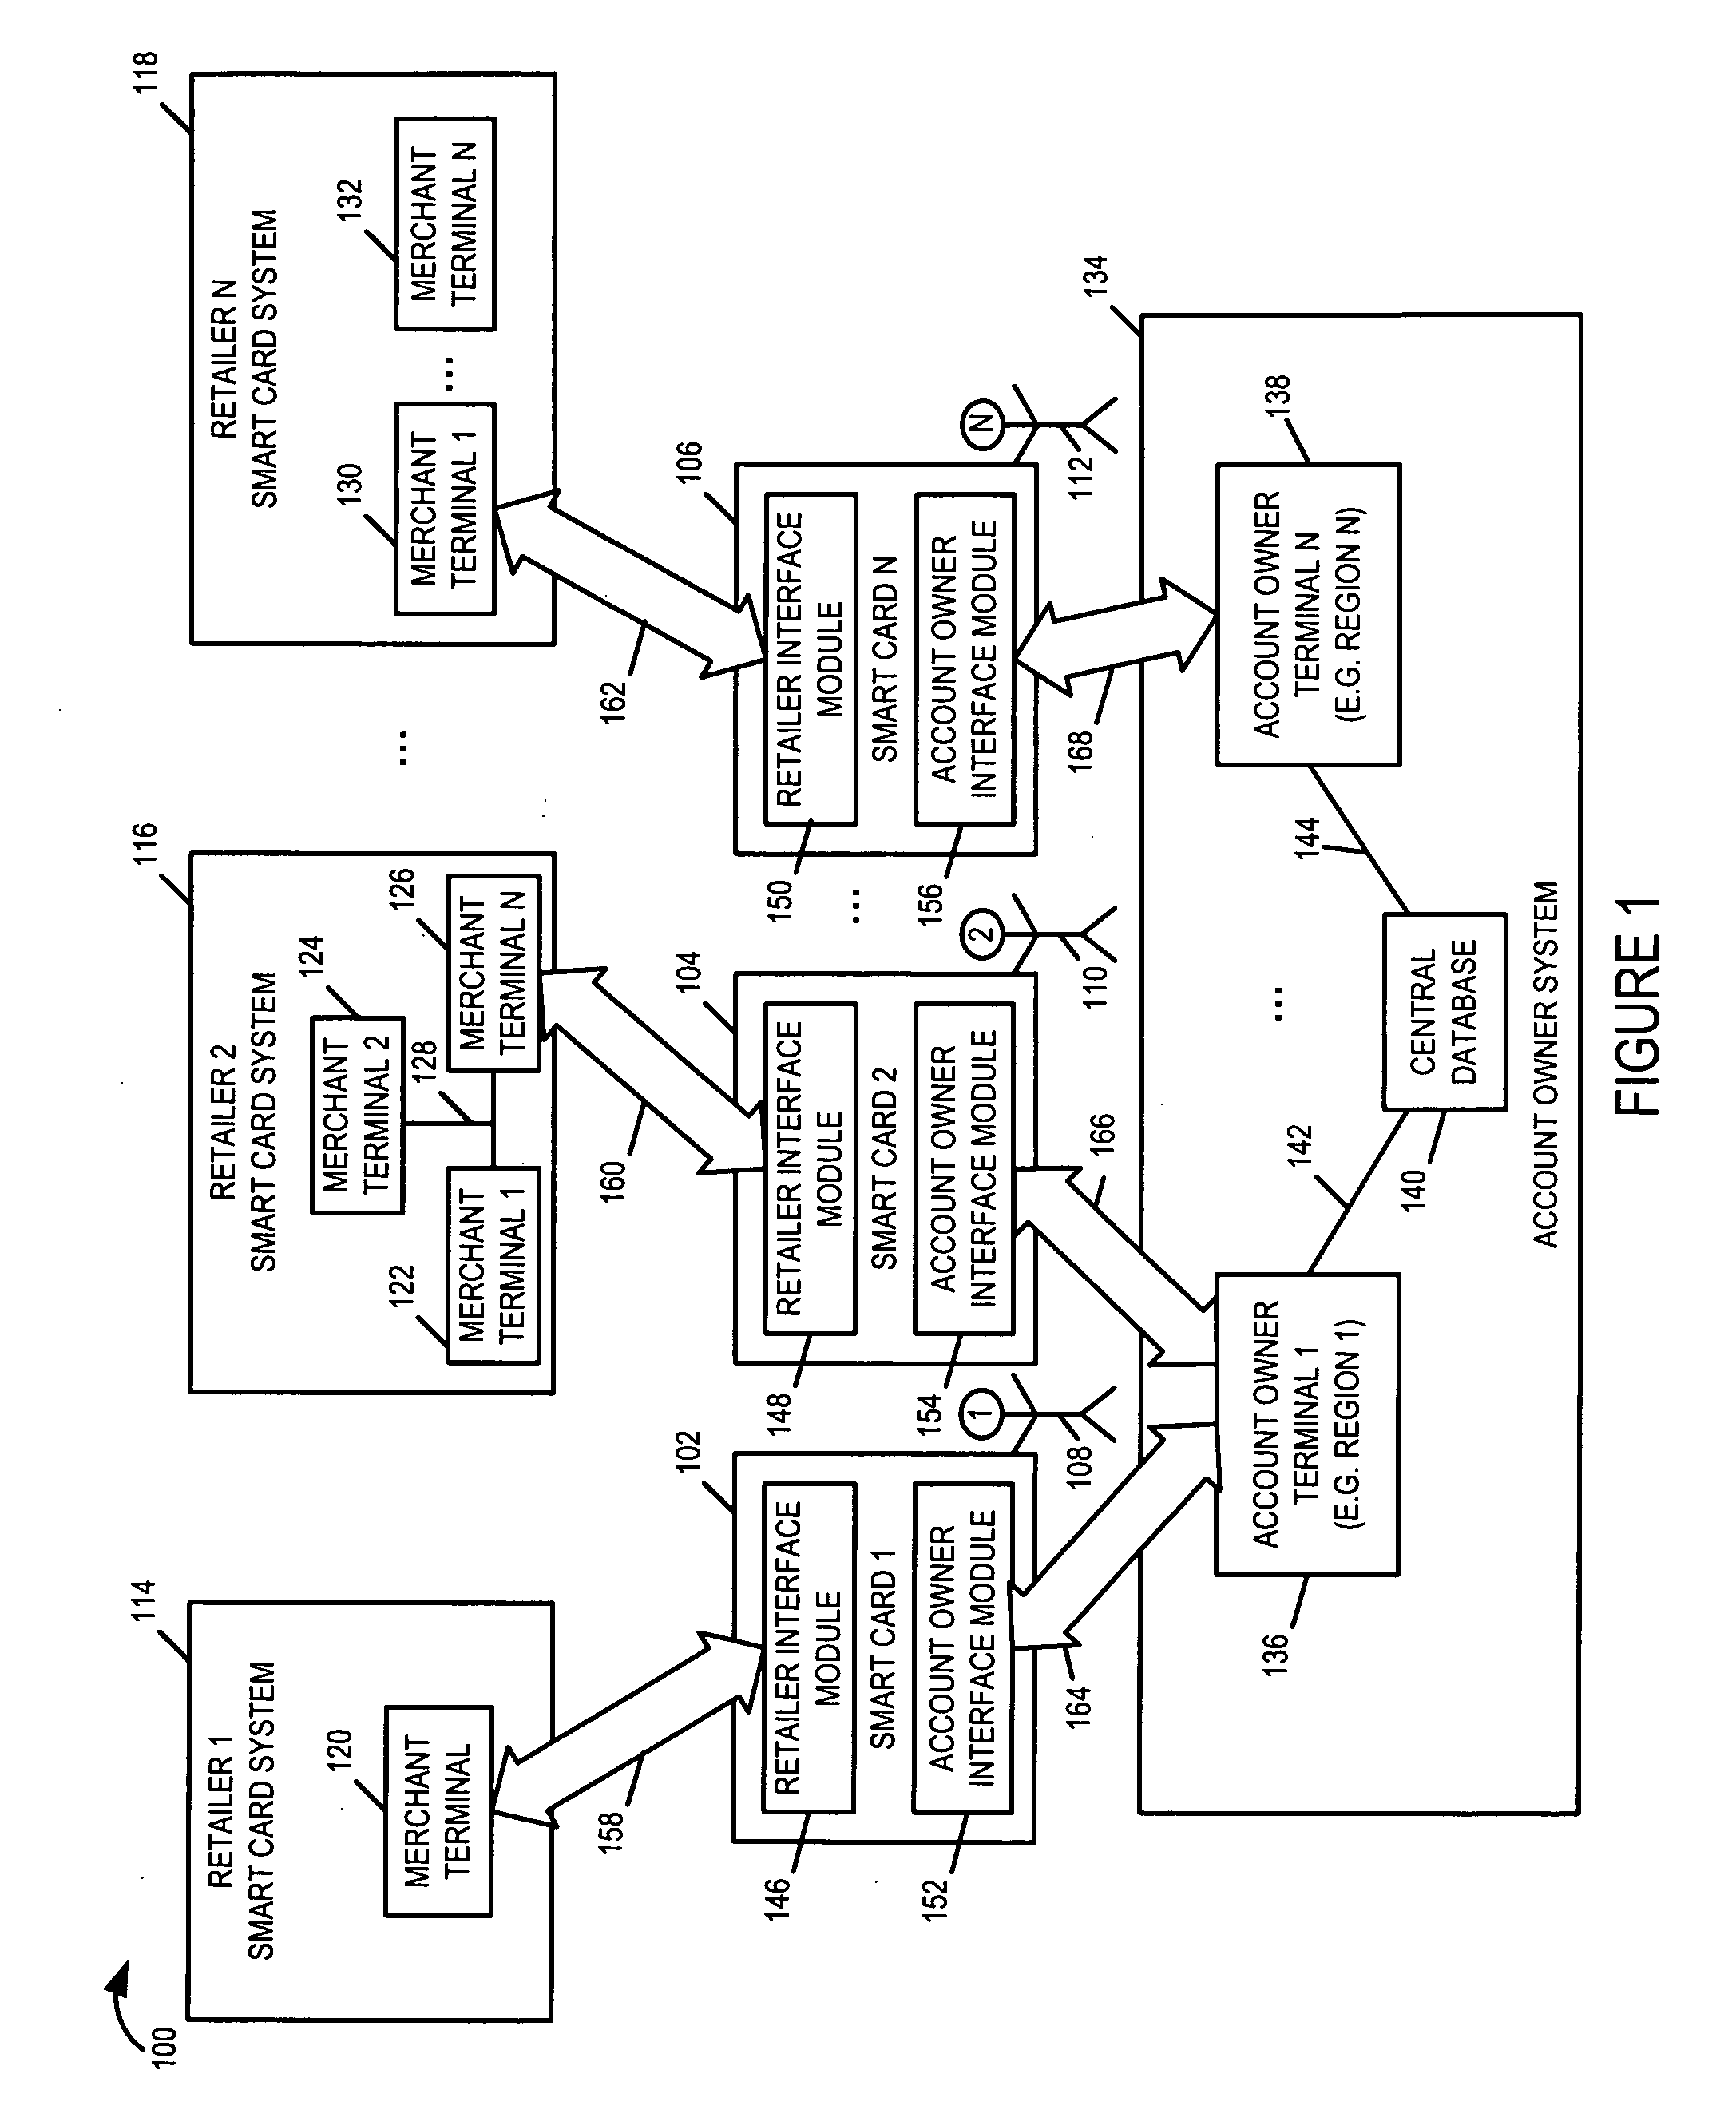 Method and apparatus for performing benefit transactions using a portable intergrated circuit device